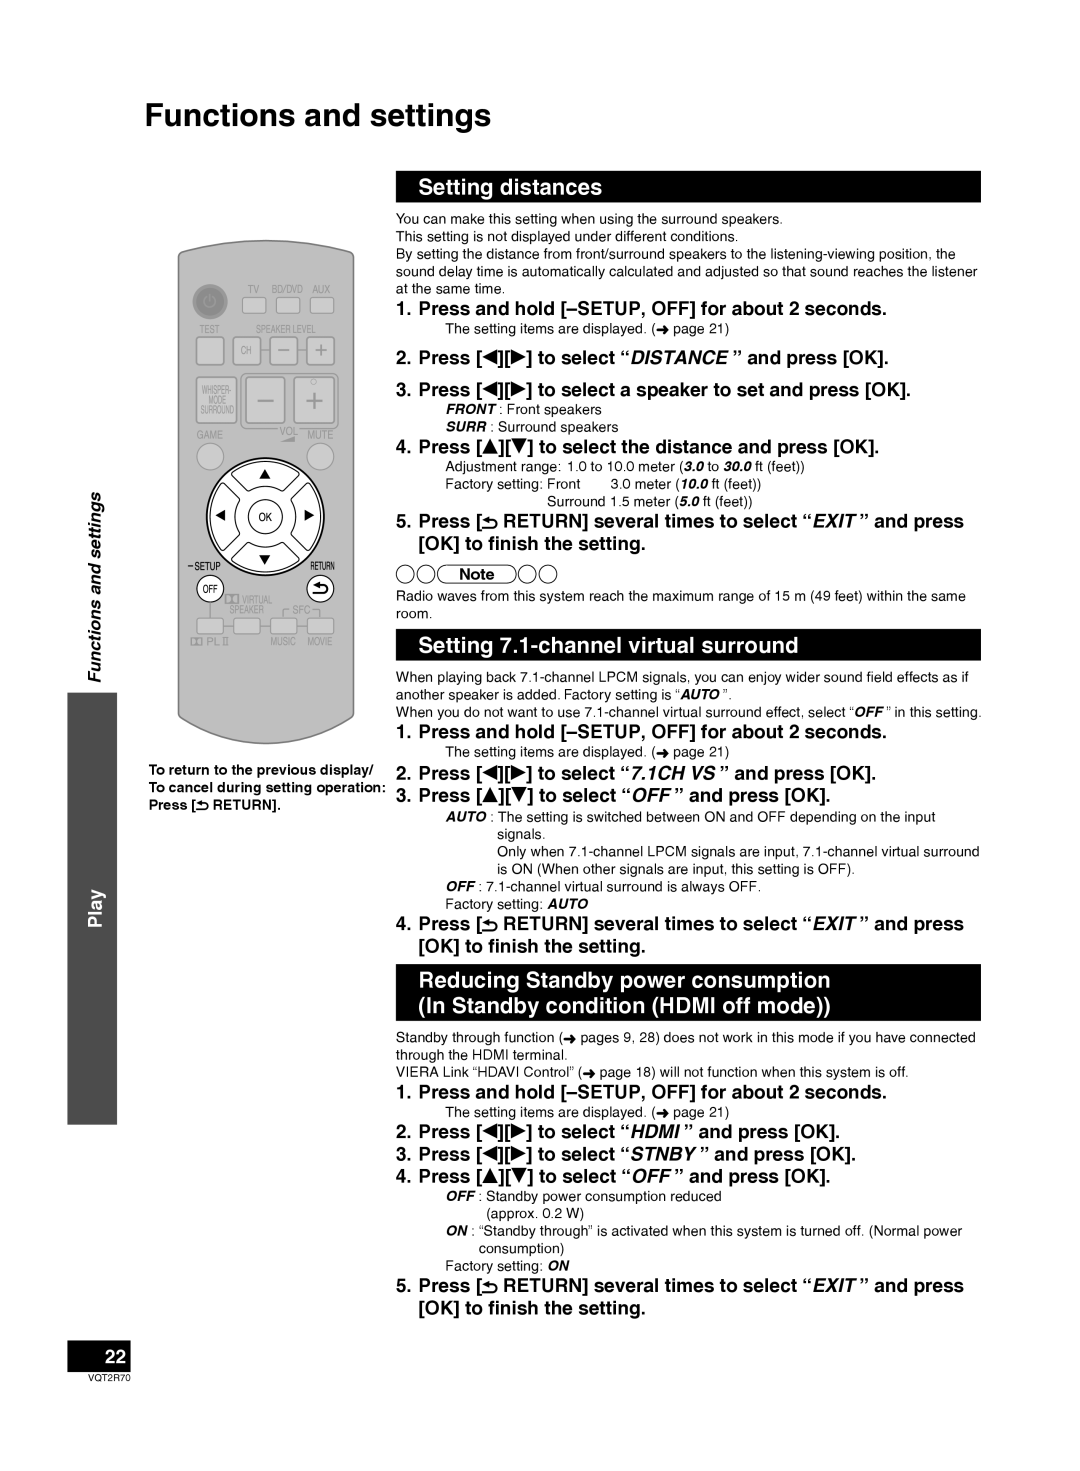 Panasonic SC-ZT2 warranty Functions and settings, Setting distances, Setting 7.1-channelvirtual surround, Play 